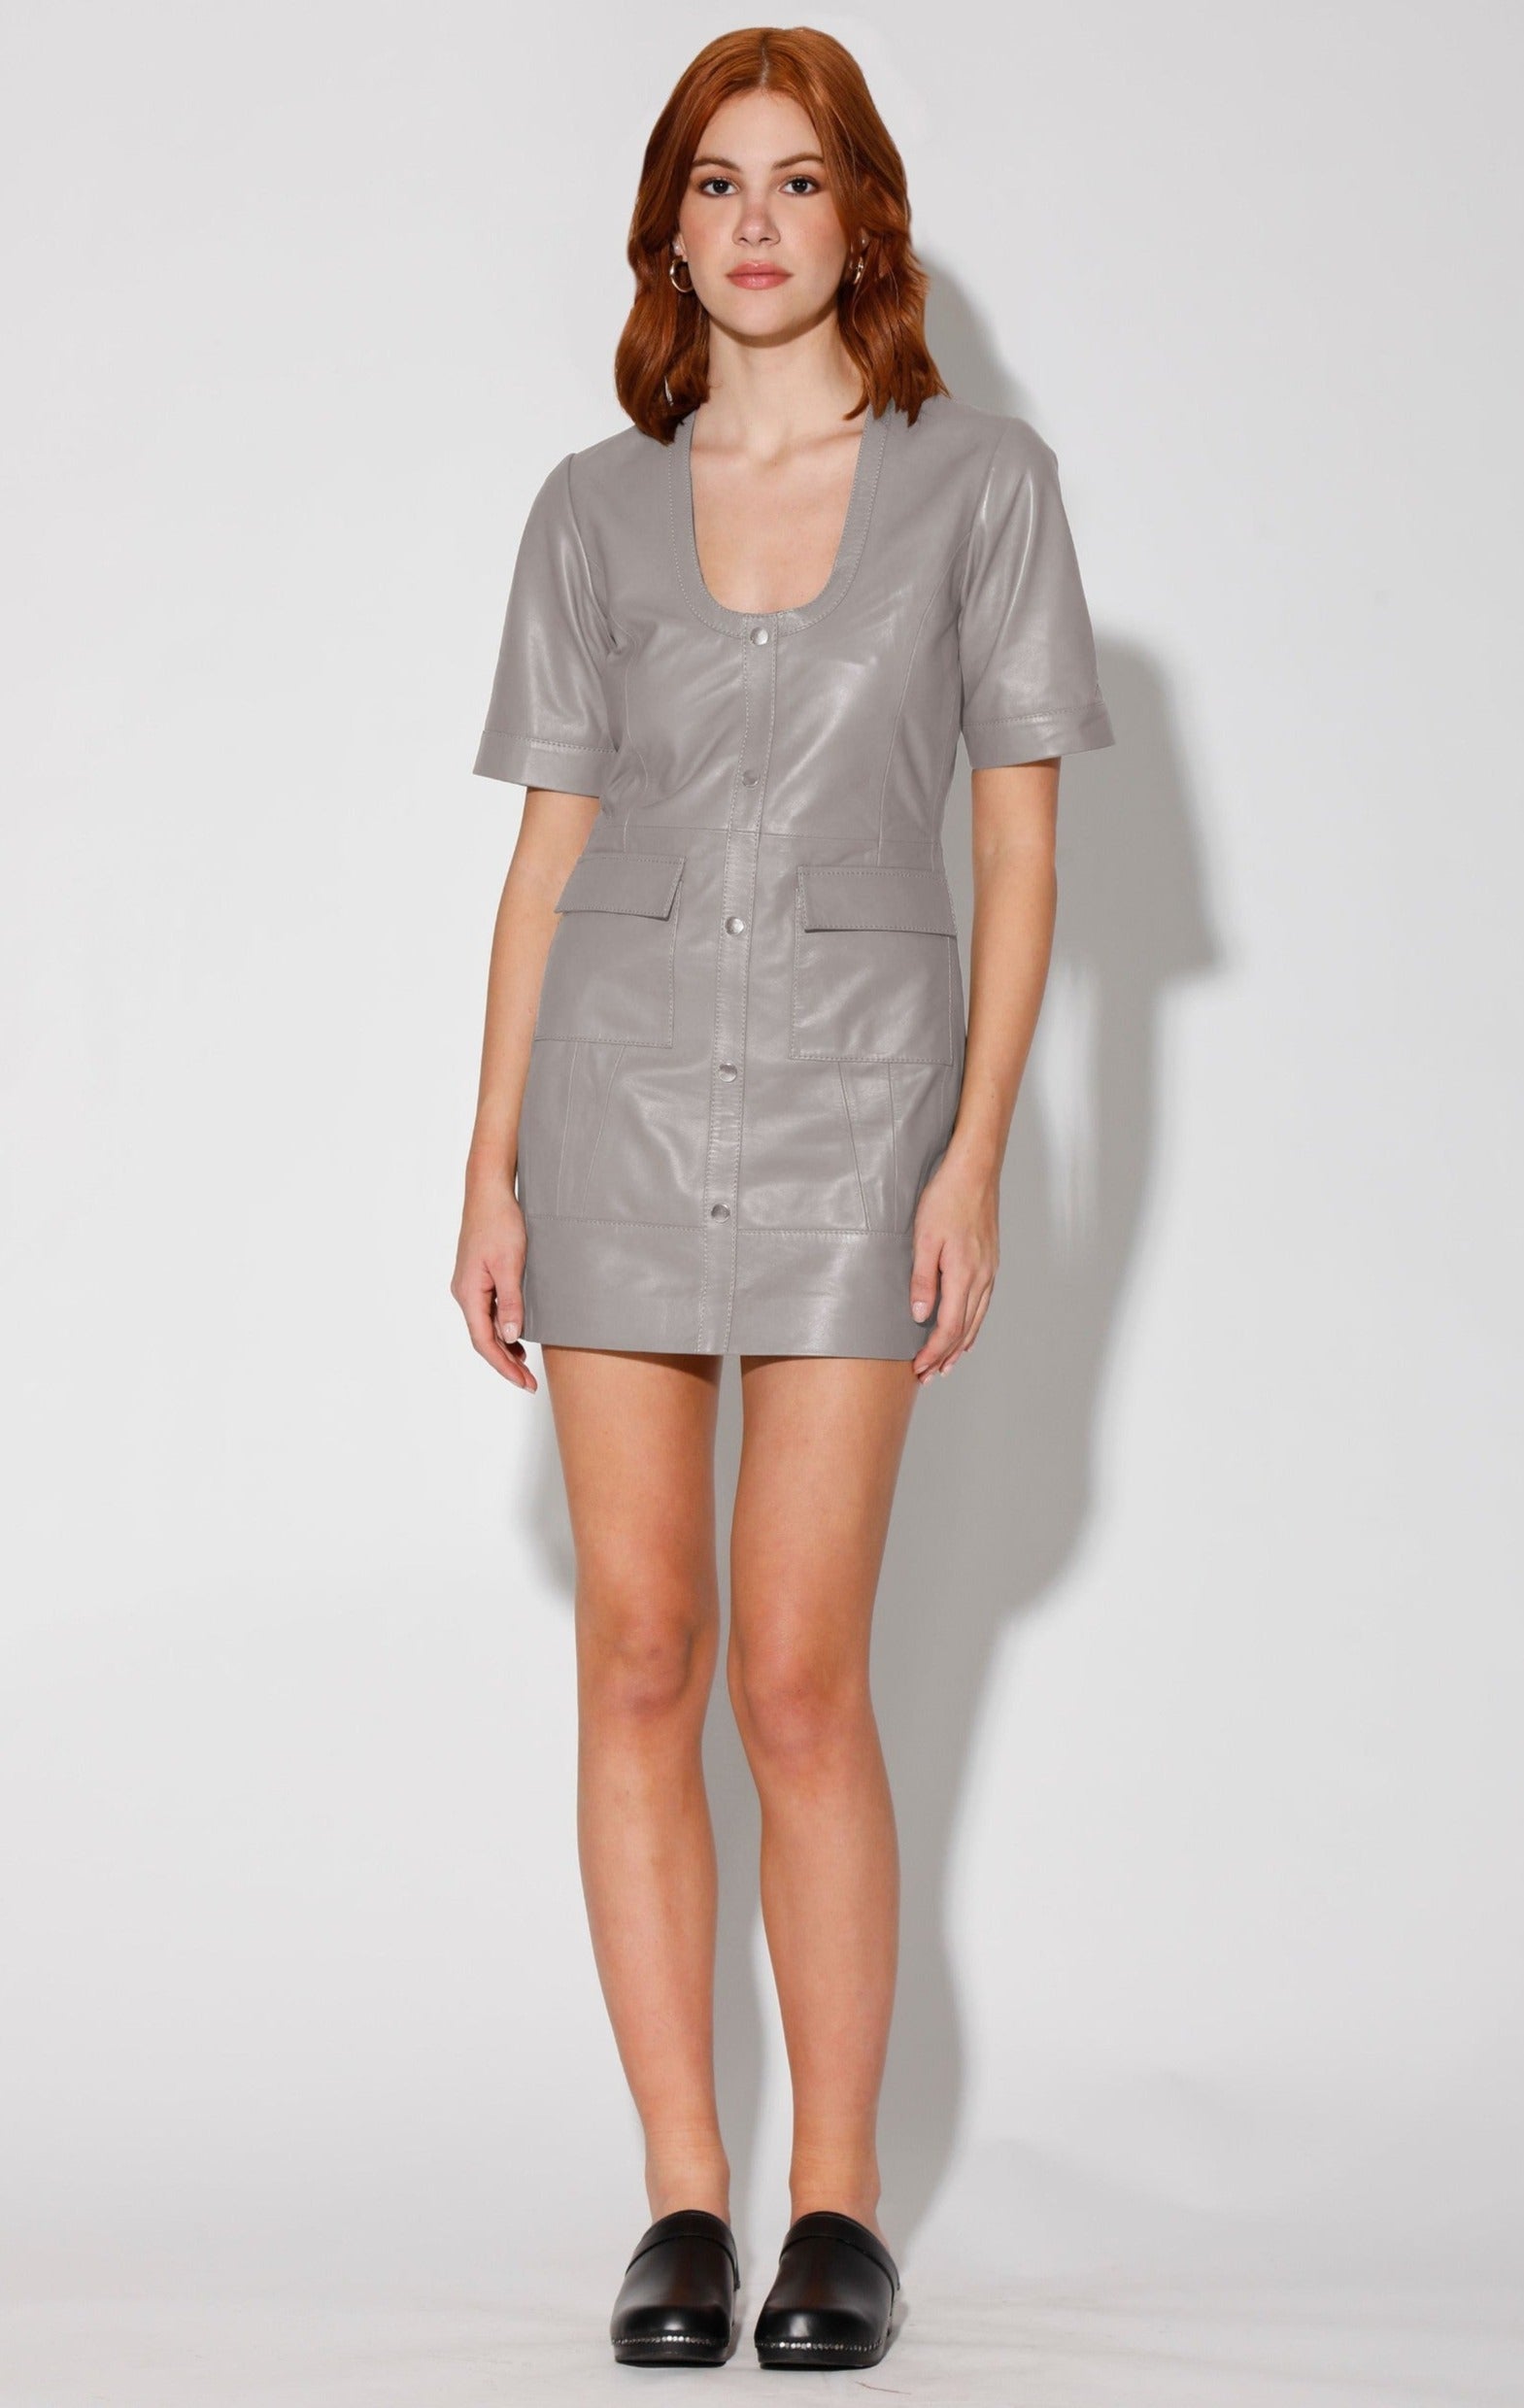 Buy Harlynn Dress, Sand - Leather by Walter Baker